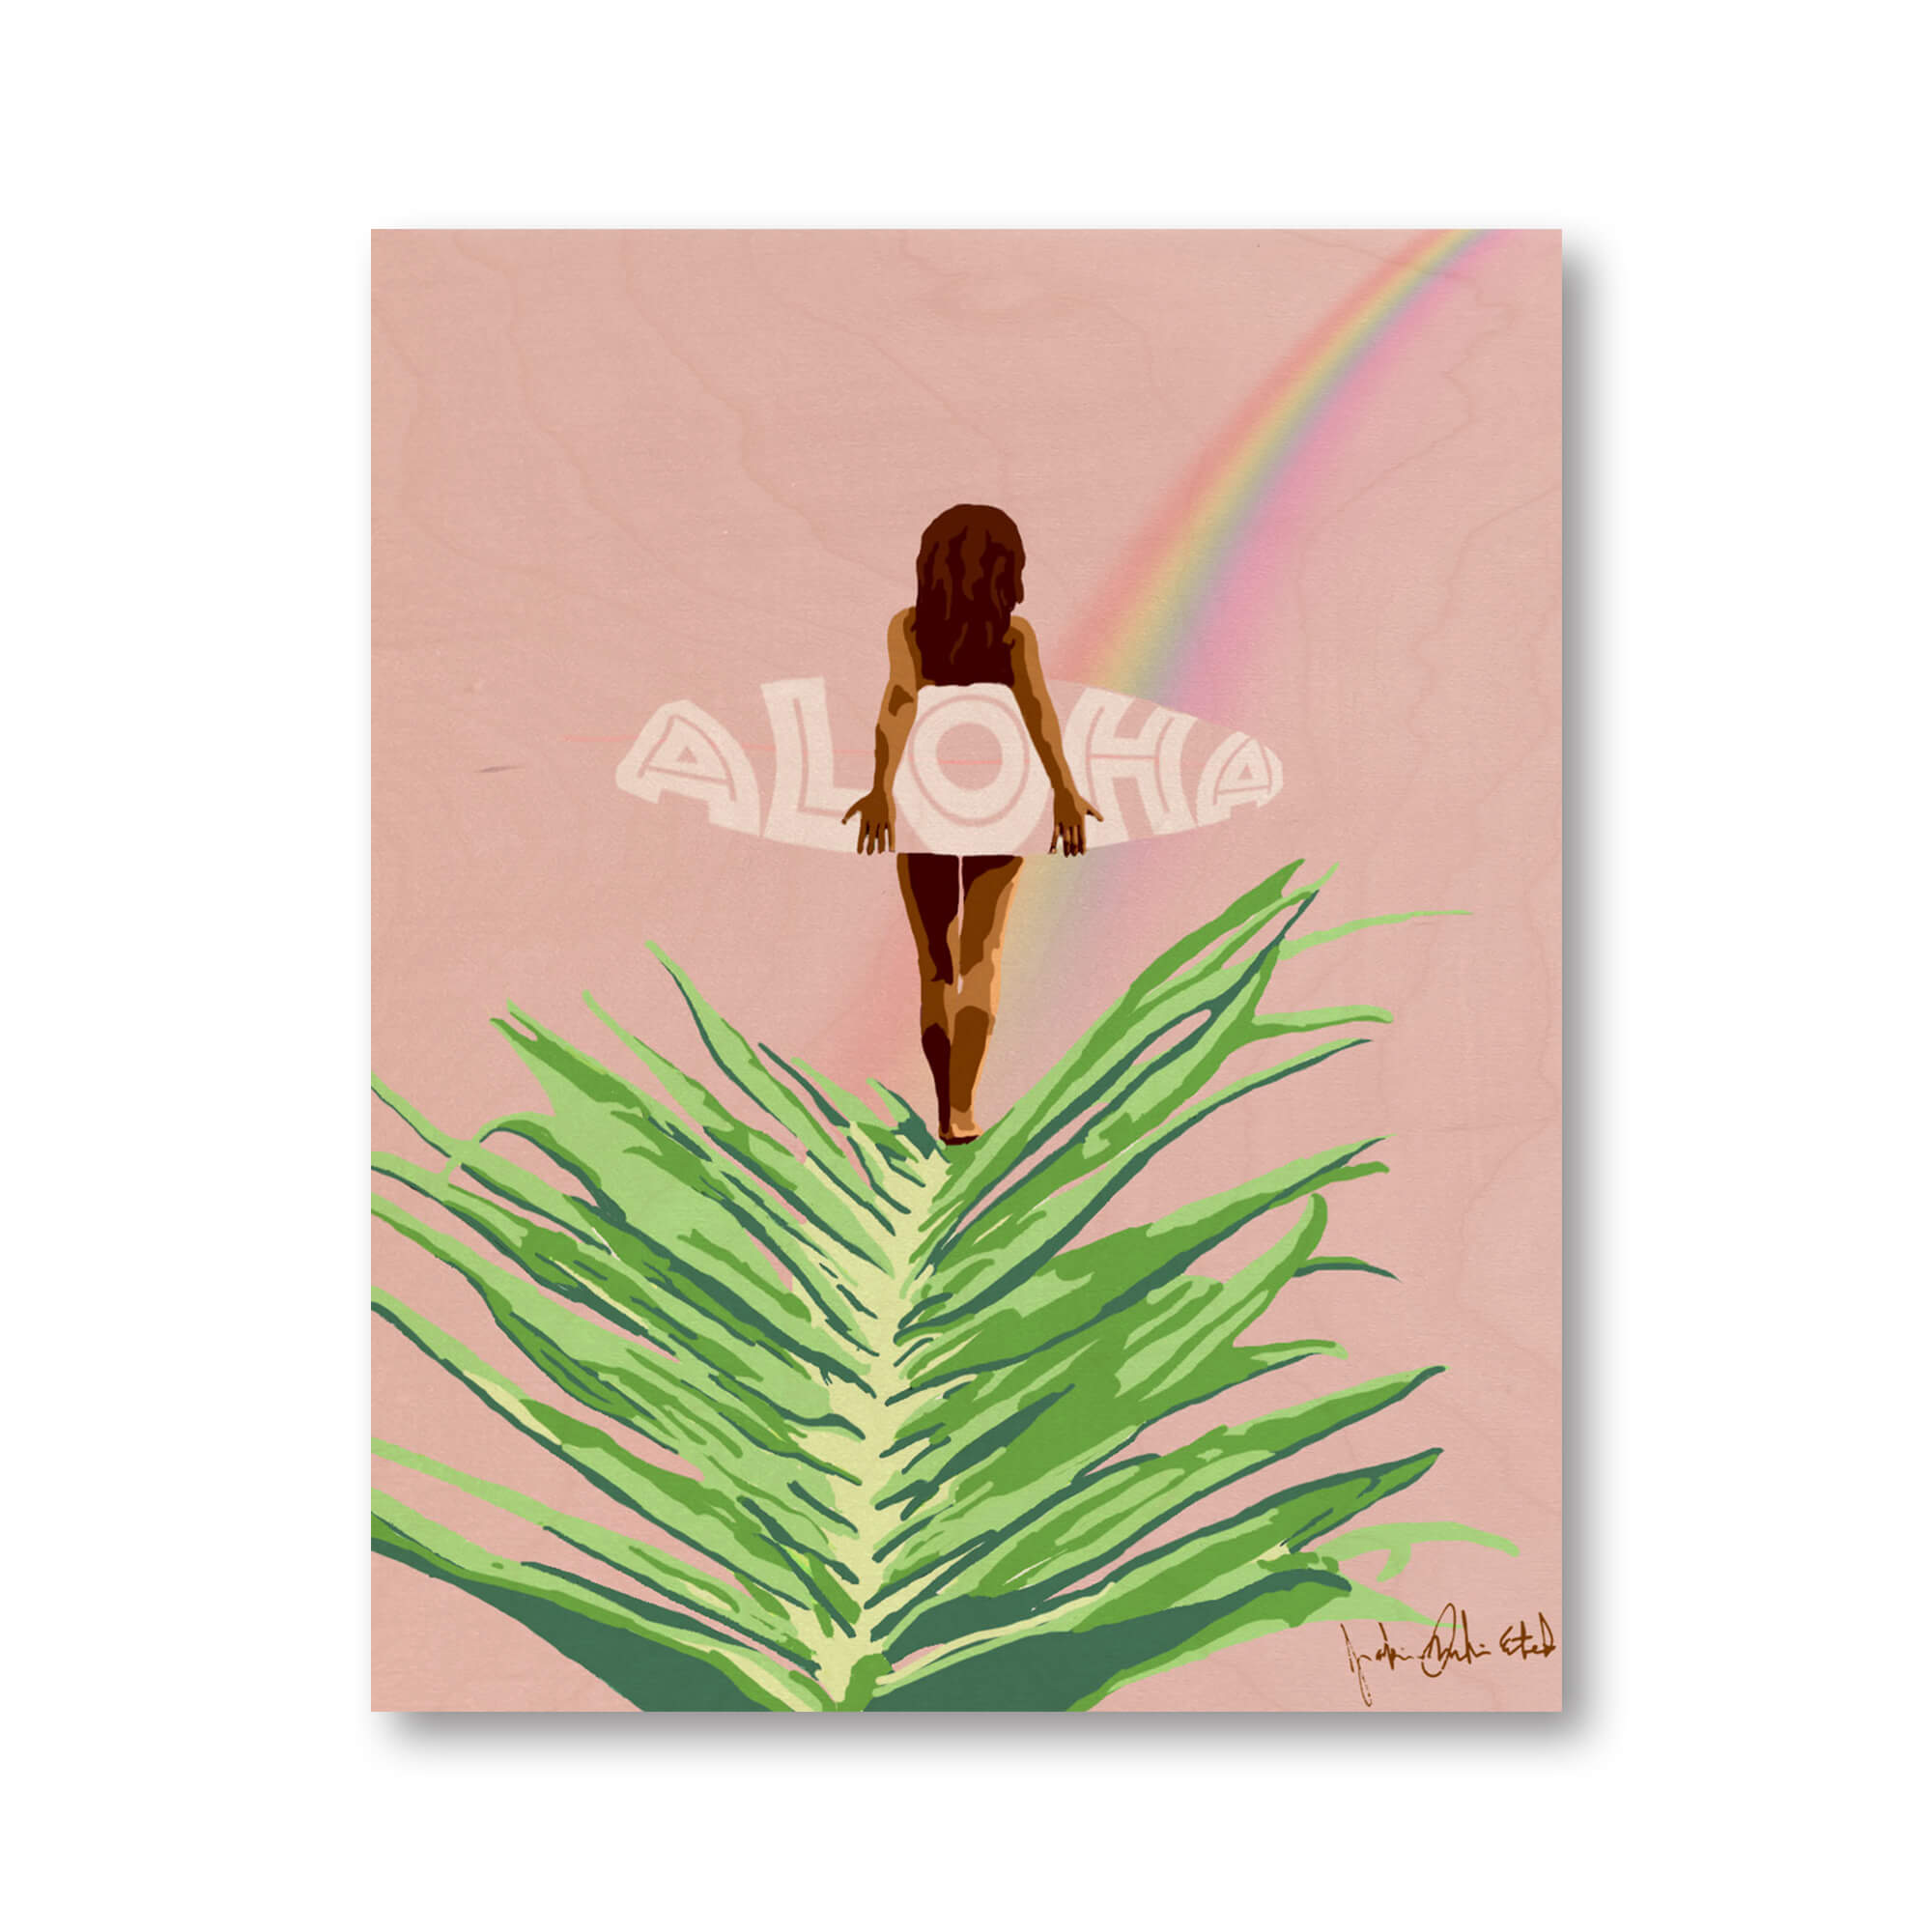 A wood print of a woman holding an Aloha surfboard following a beautiful rainbow on  a pastel pink background, printed on a birch wood panel by Hawaii artist Jackie Eitel